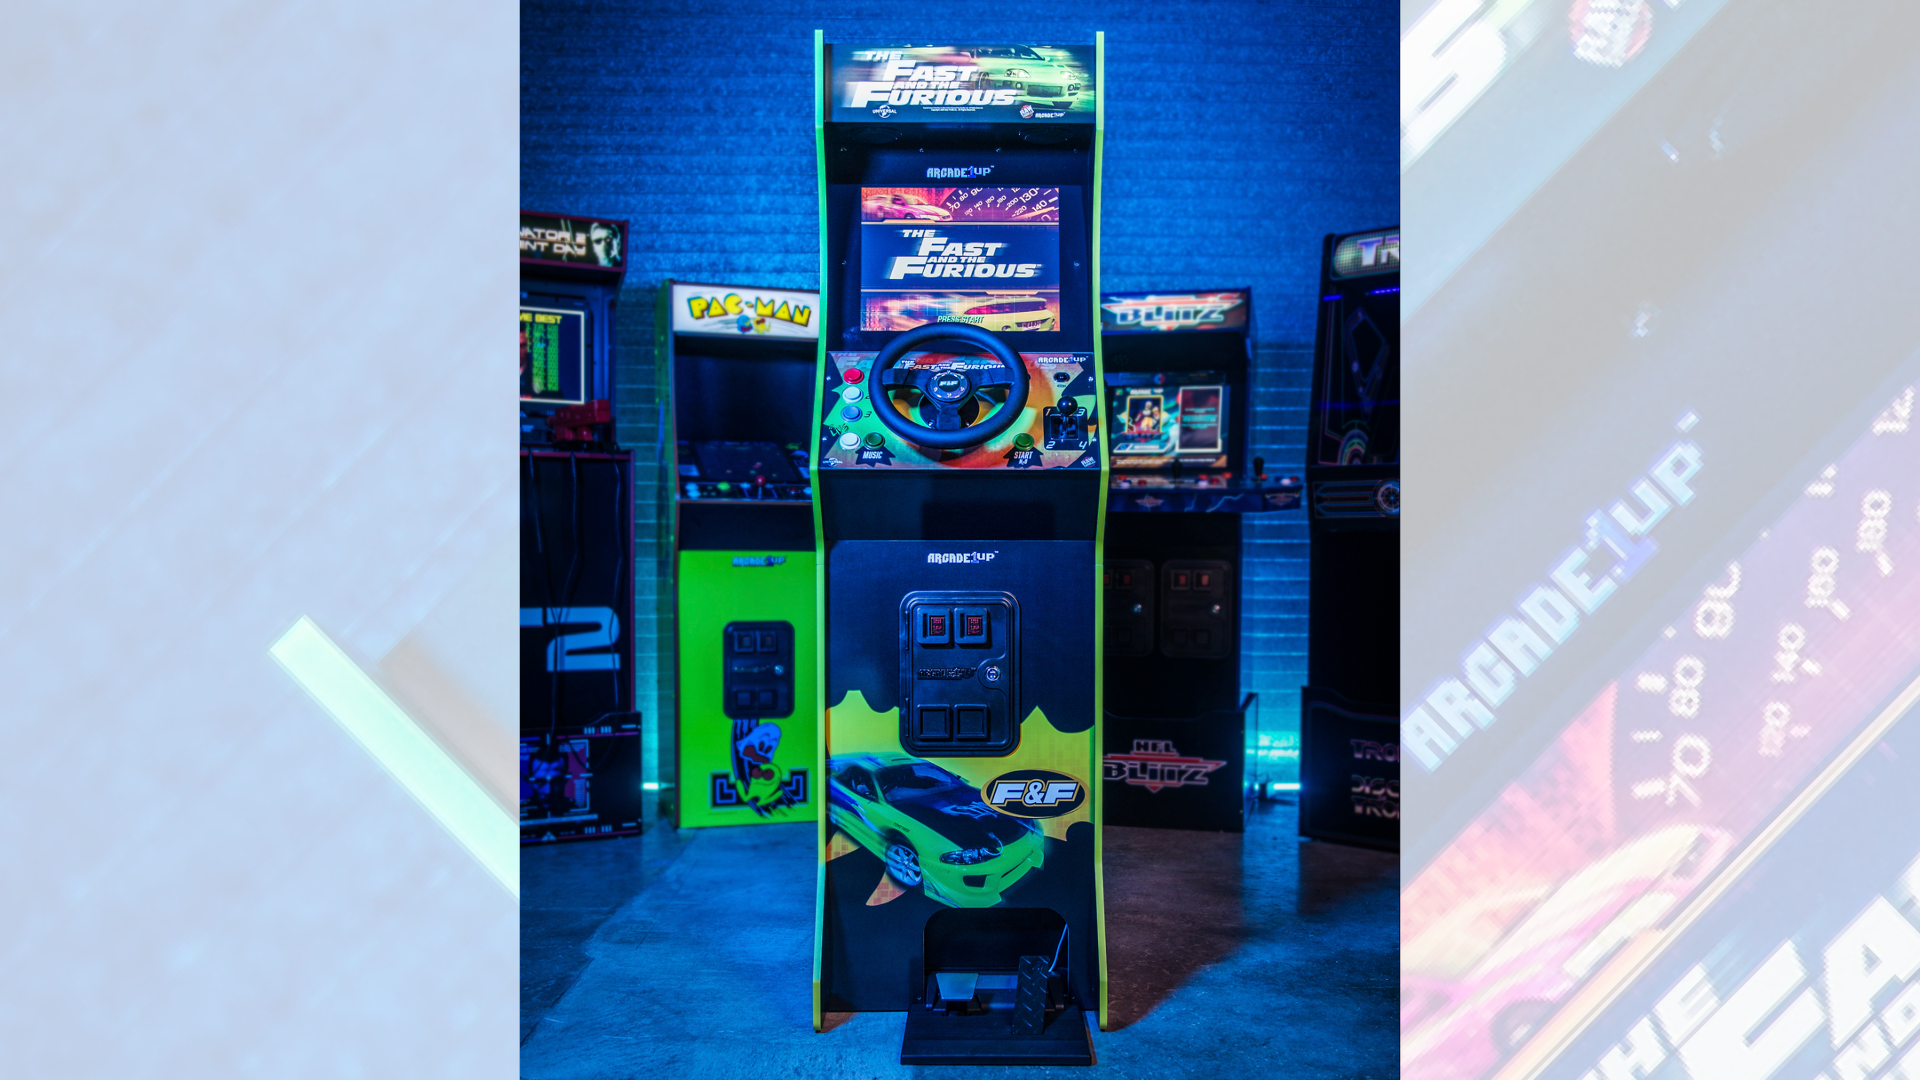 Bring the 'Fast and the Furious' action home with Arcade 1Up's